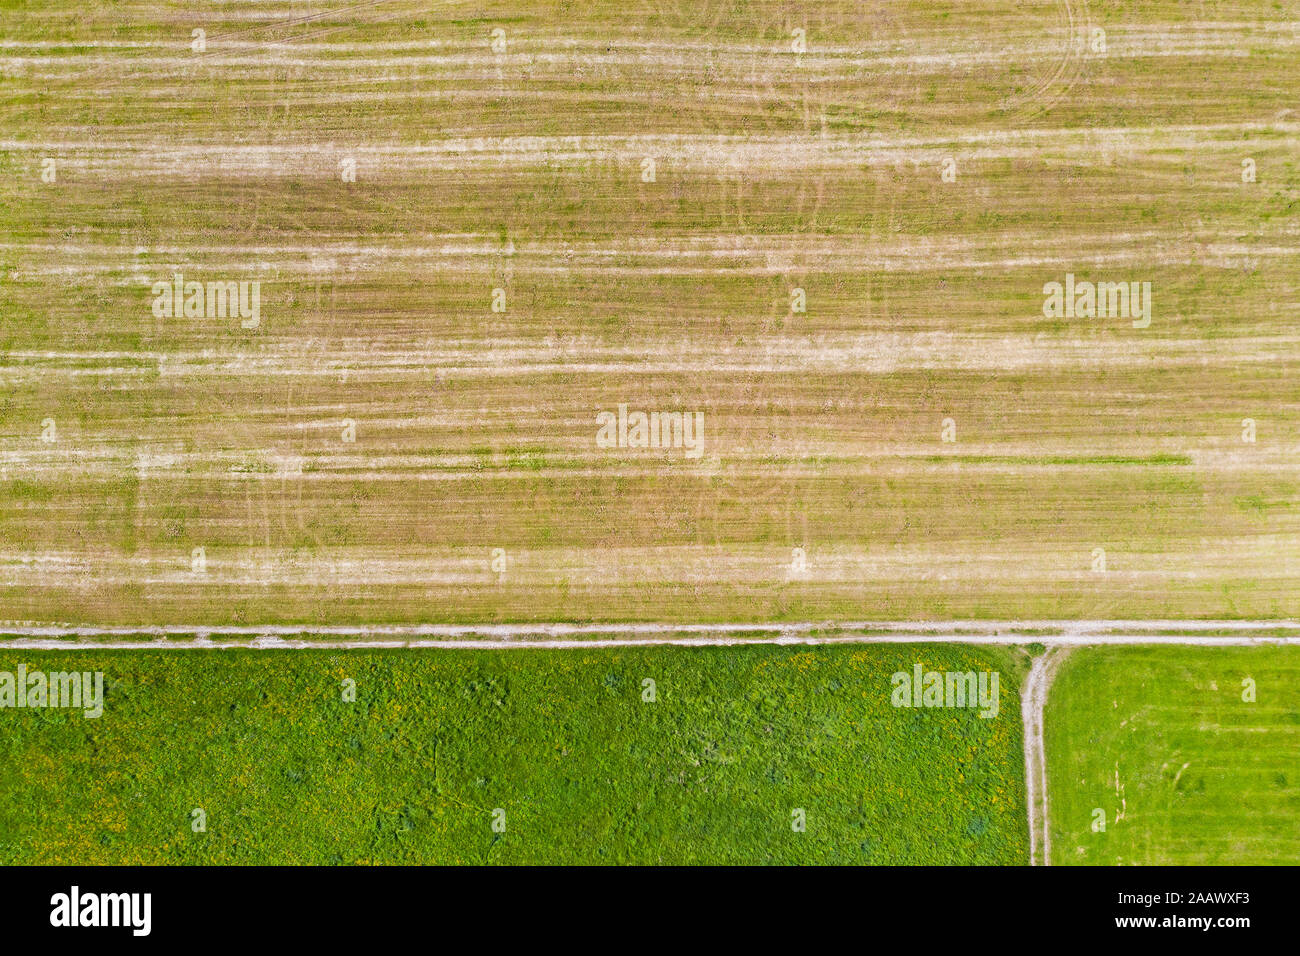 Aerial view of agricultural field, Beuerberg, Germany Stock Photo